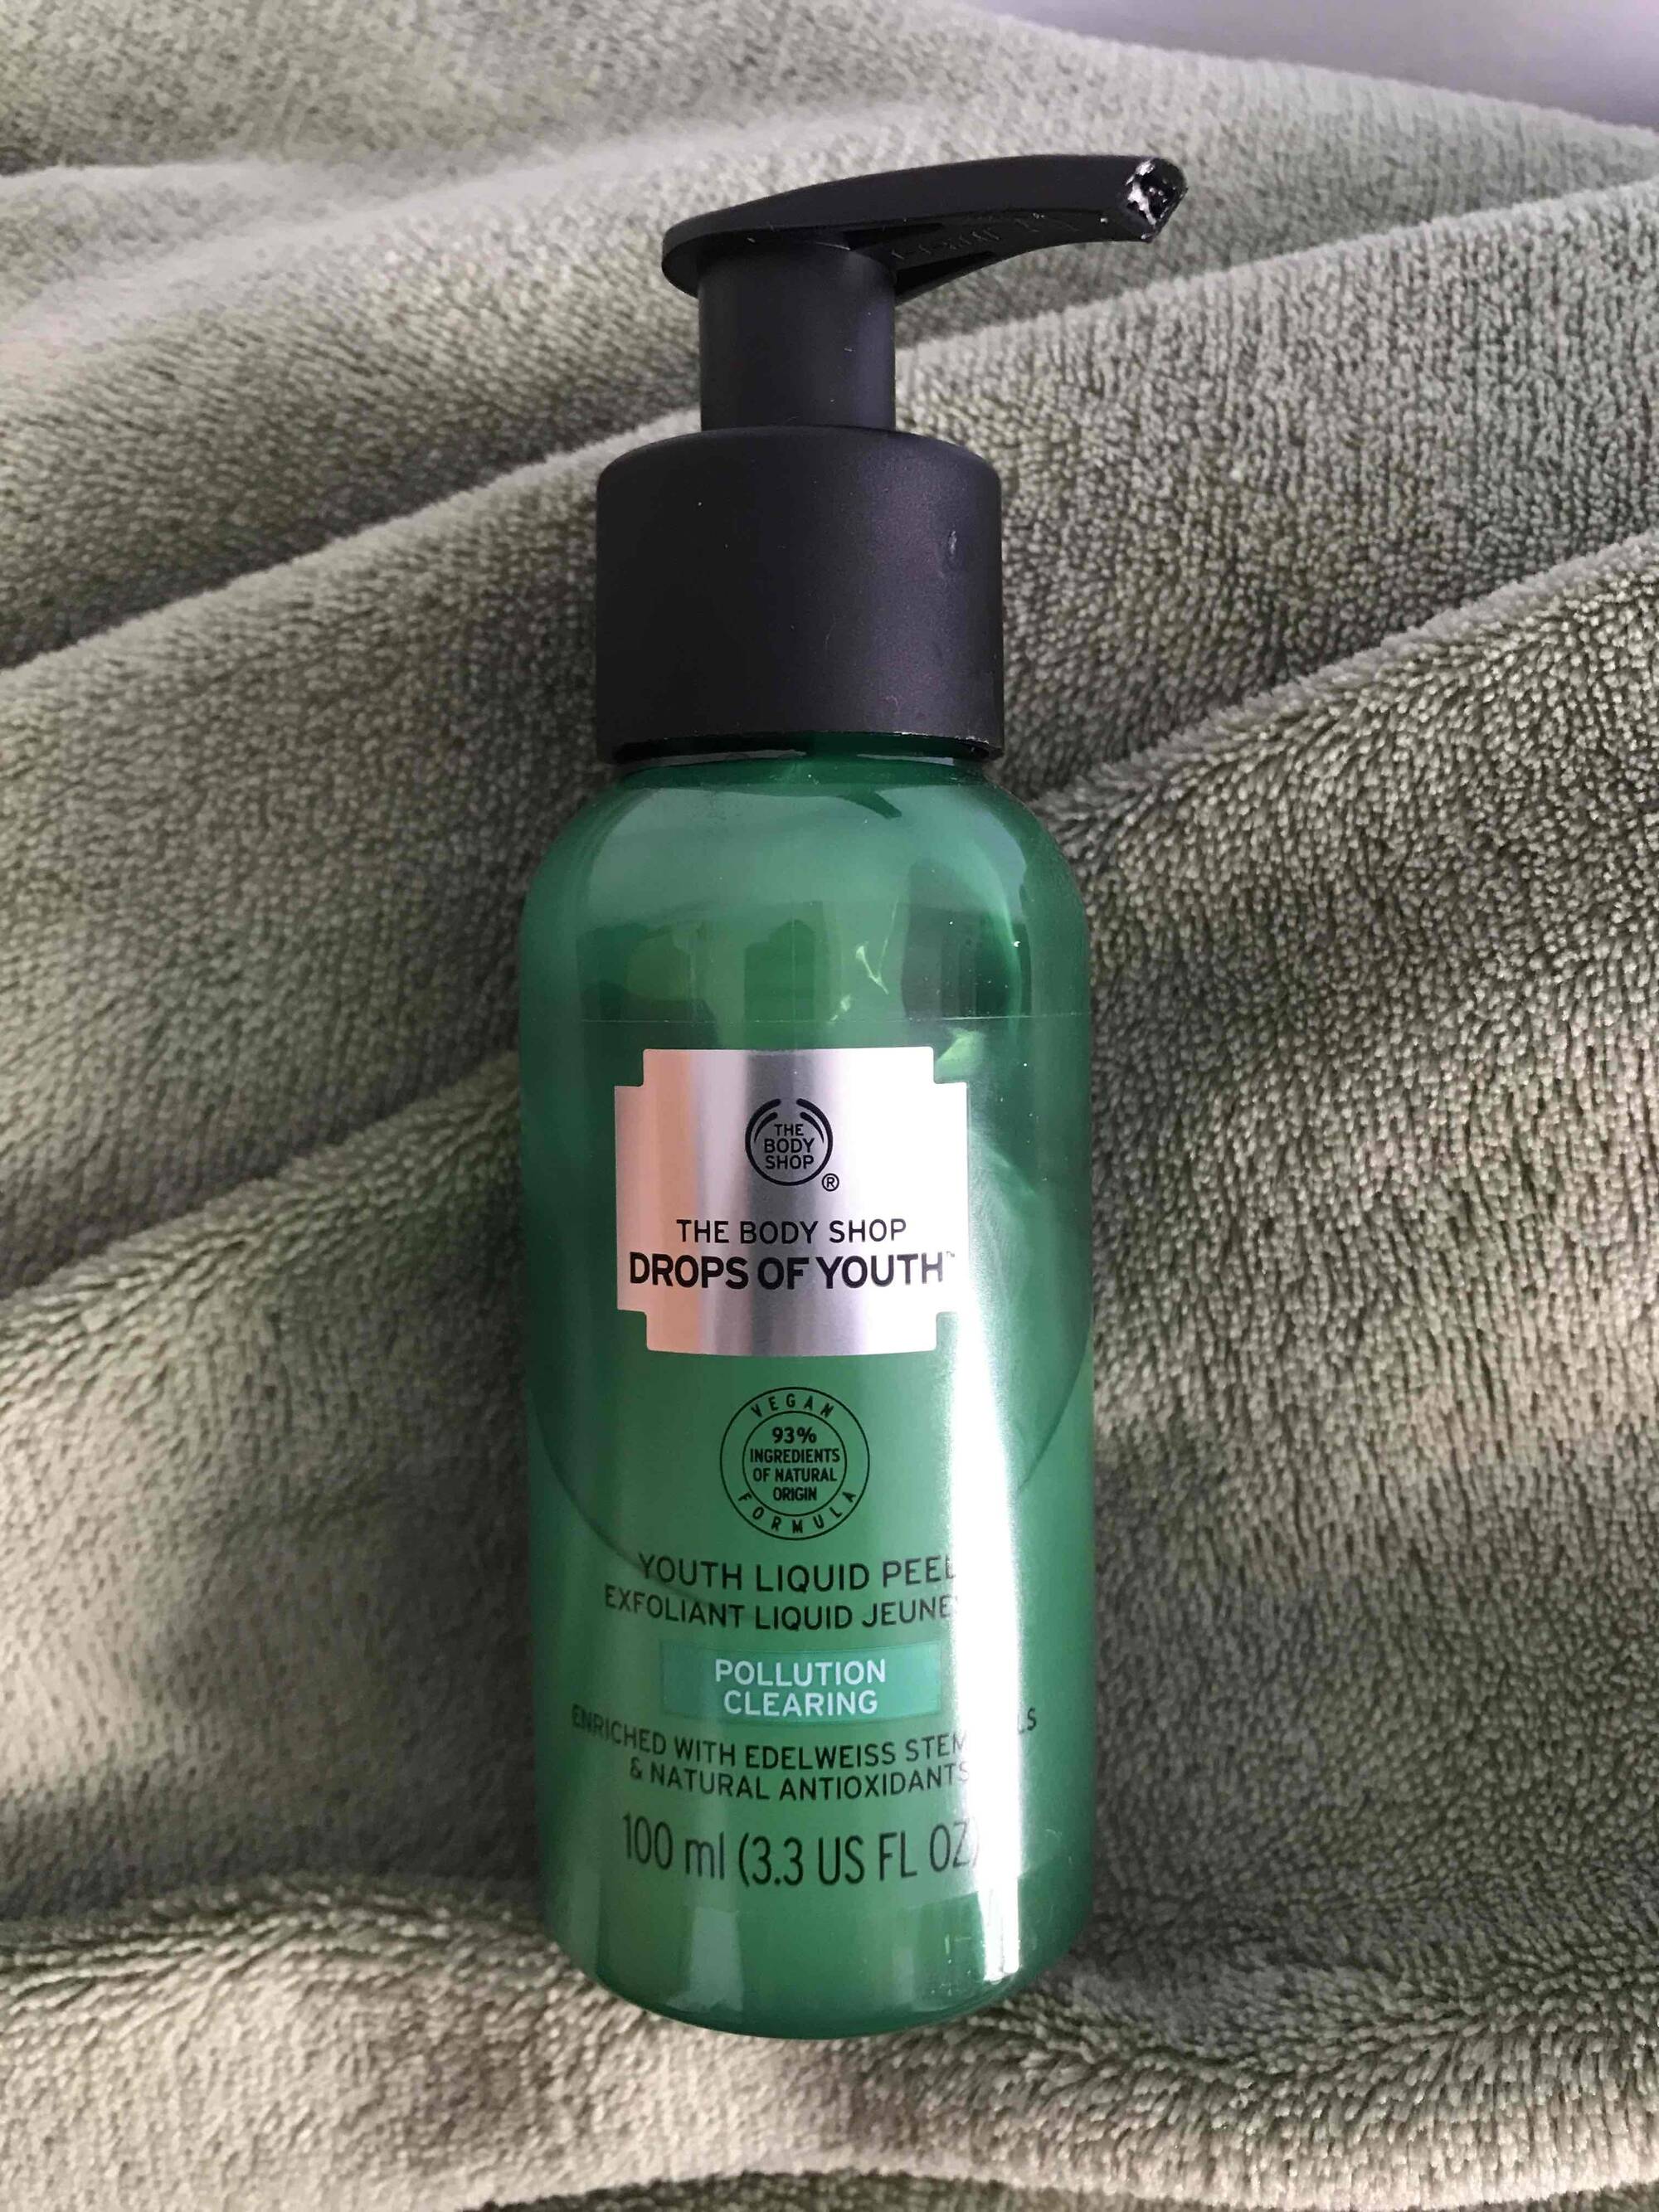 THE BODY SHOP - Drops of youth - Exfoliant liquid jeunesse